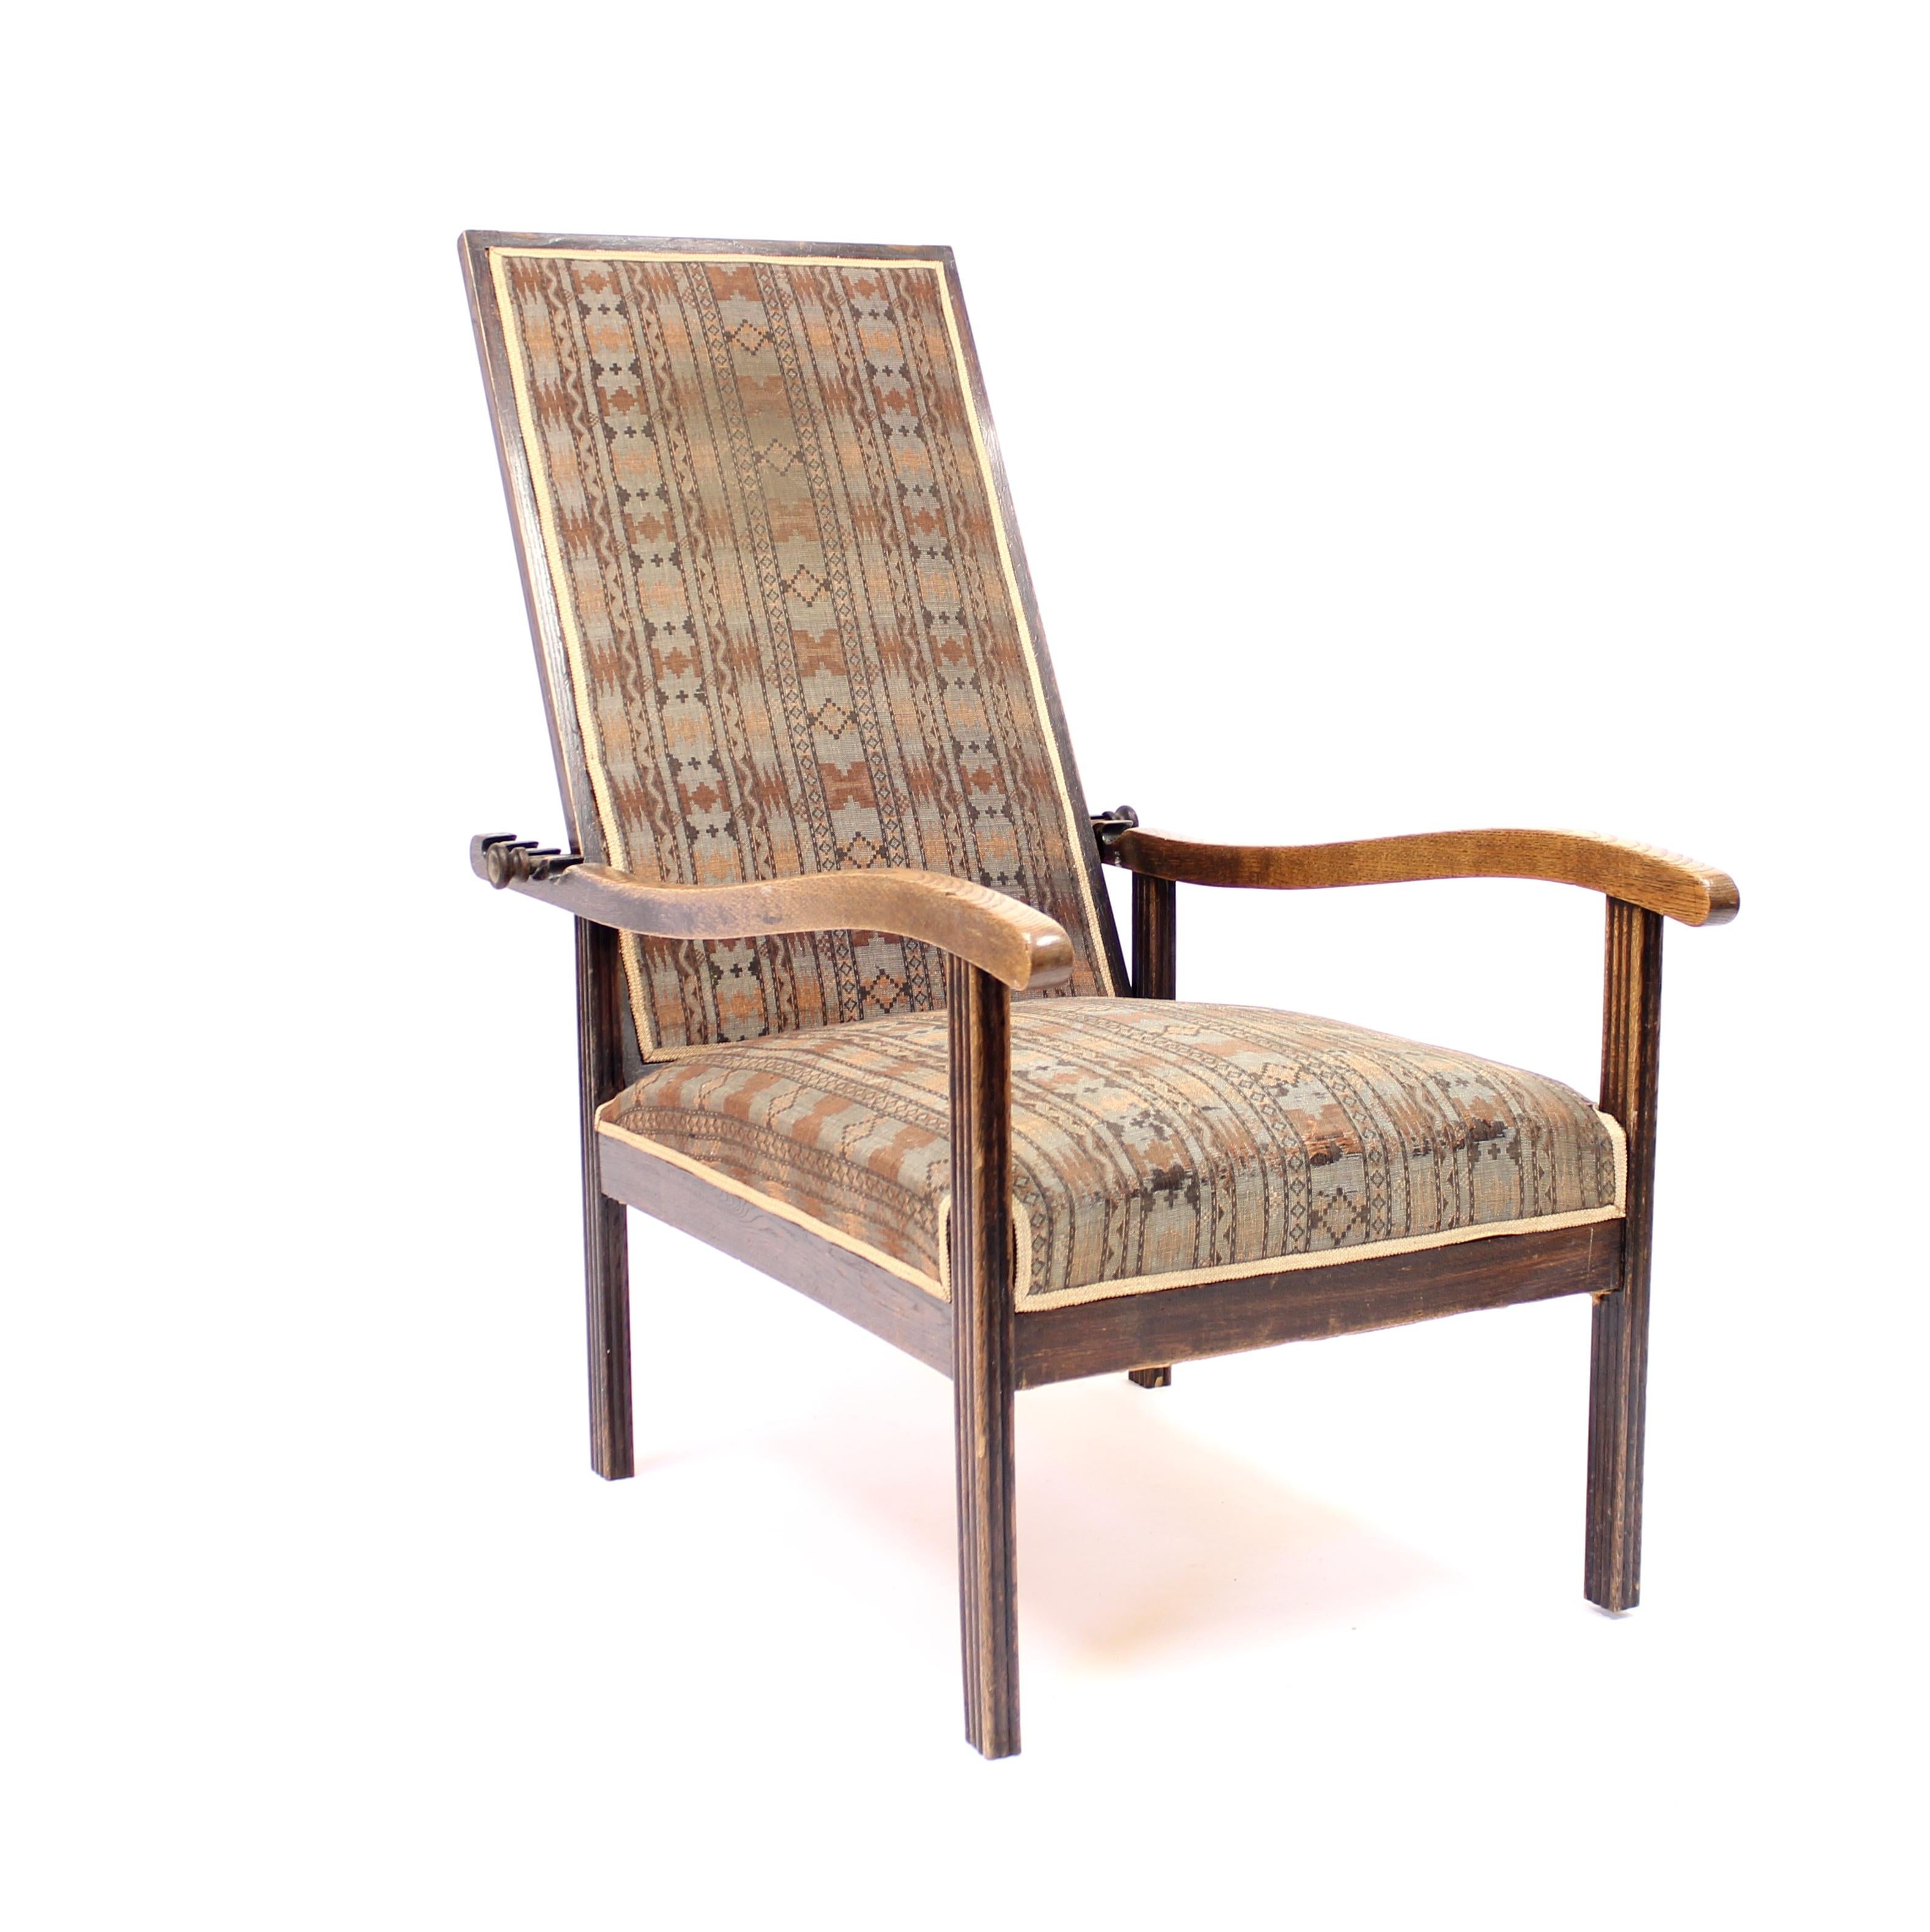 Arts and Crafts Antique Arts & Crafts Oak Reclining Chair, Early 20th Century For Sale